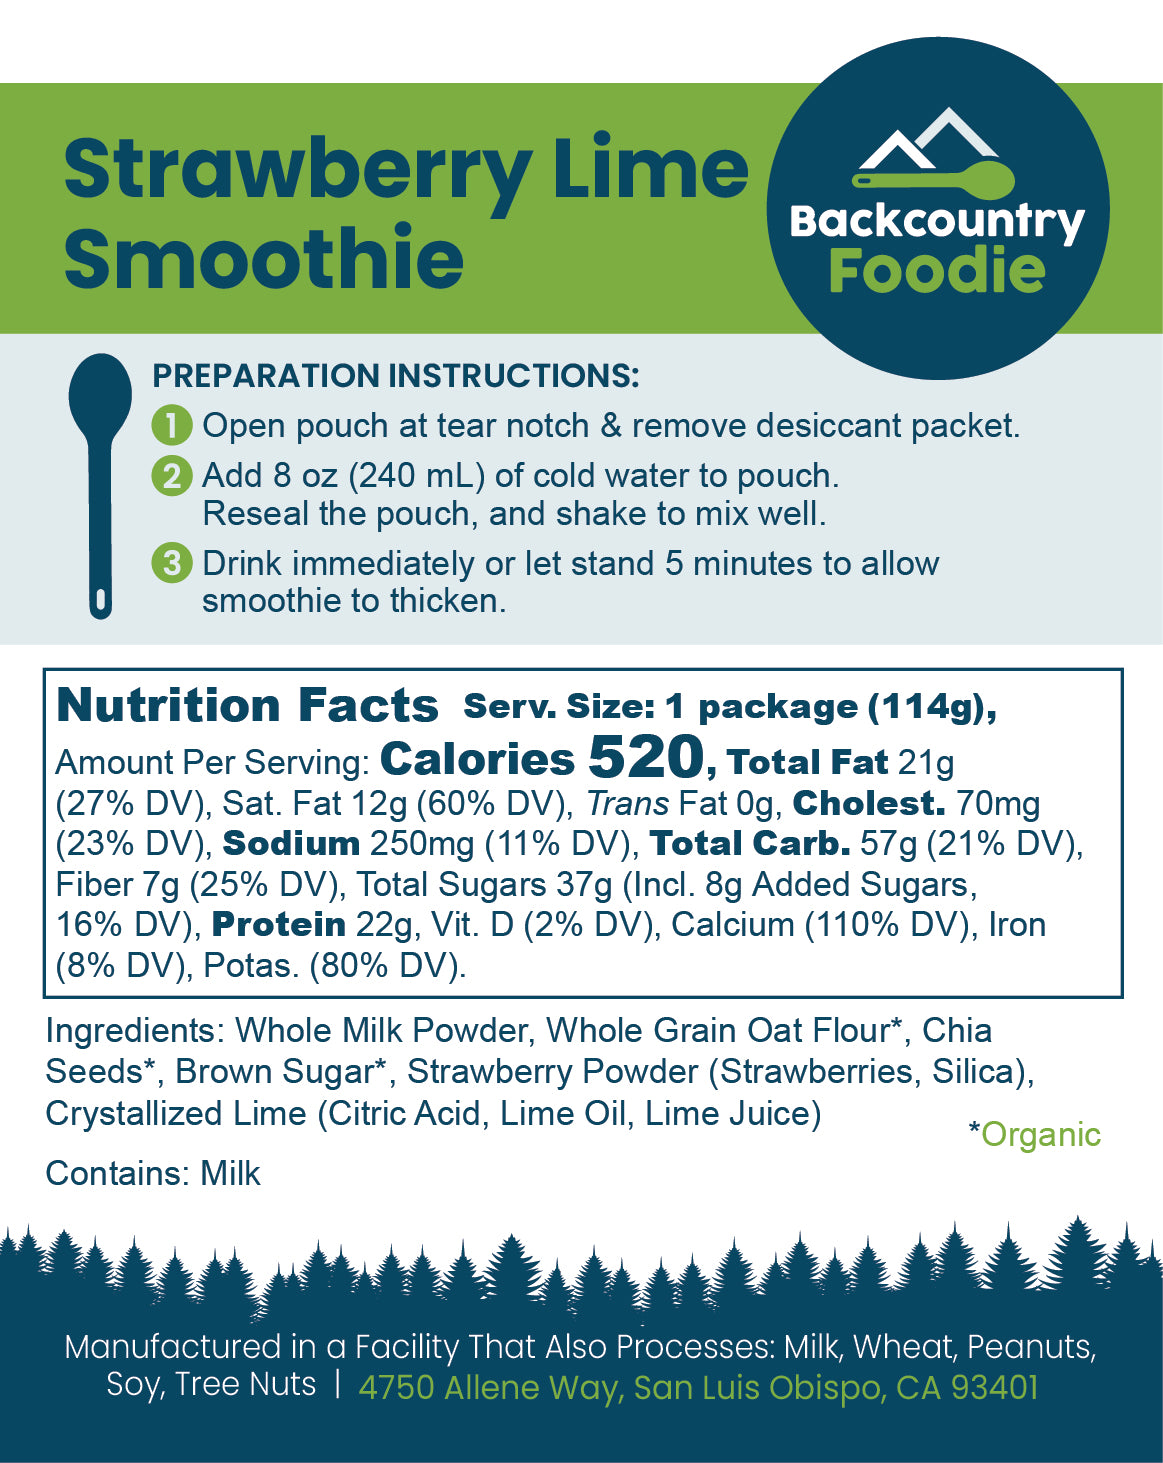 Backcountry Foodie - Strawberry Lime Smoothie